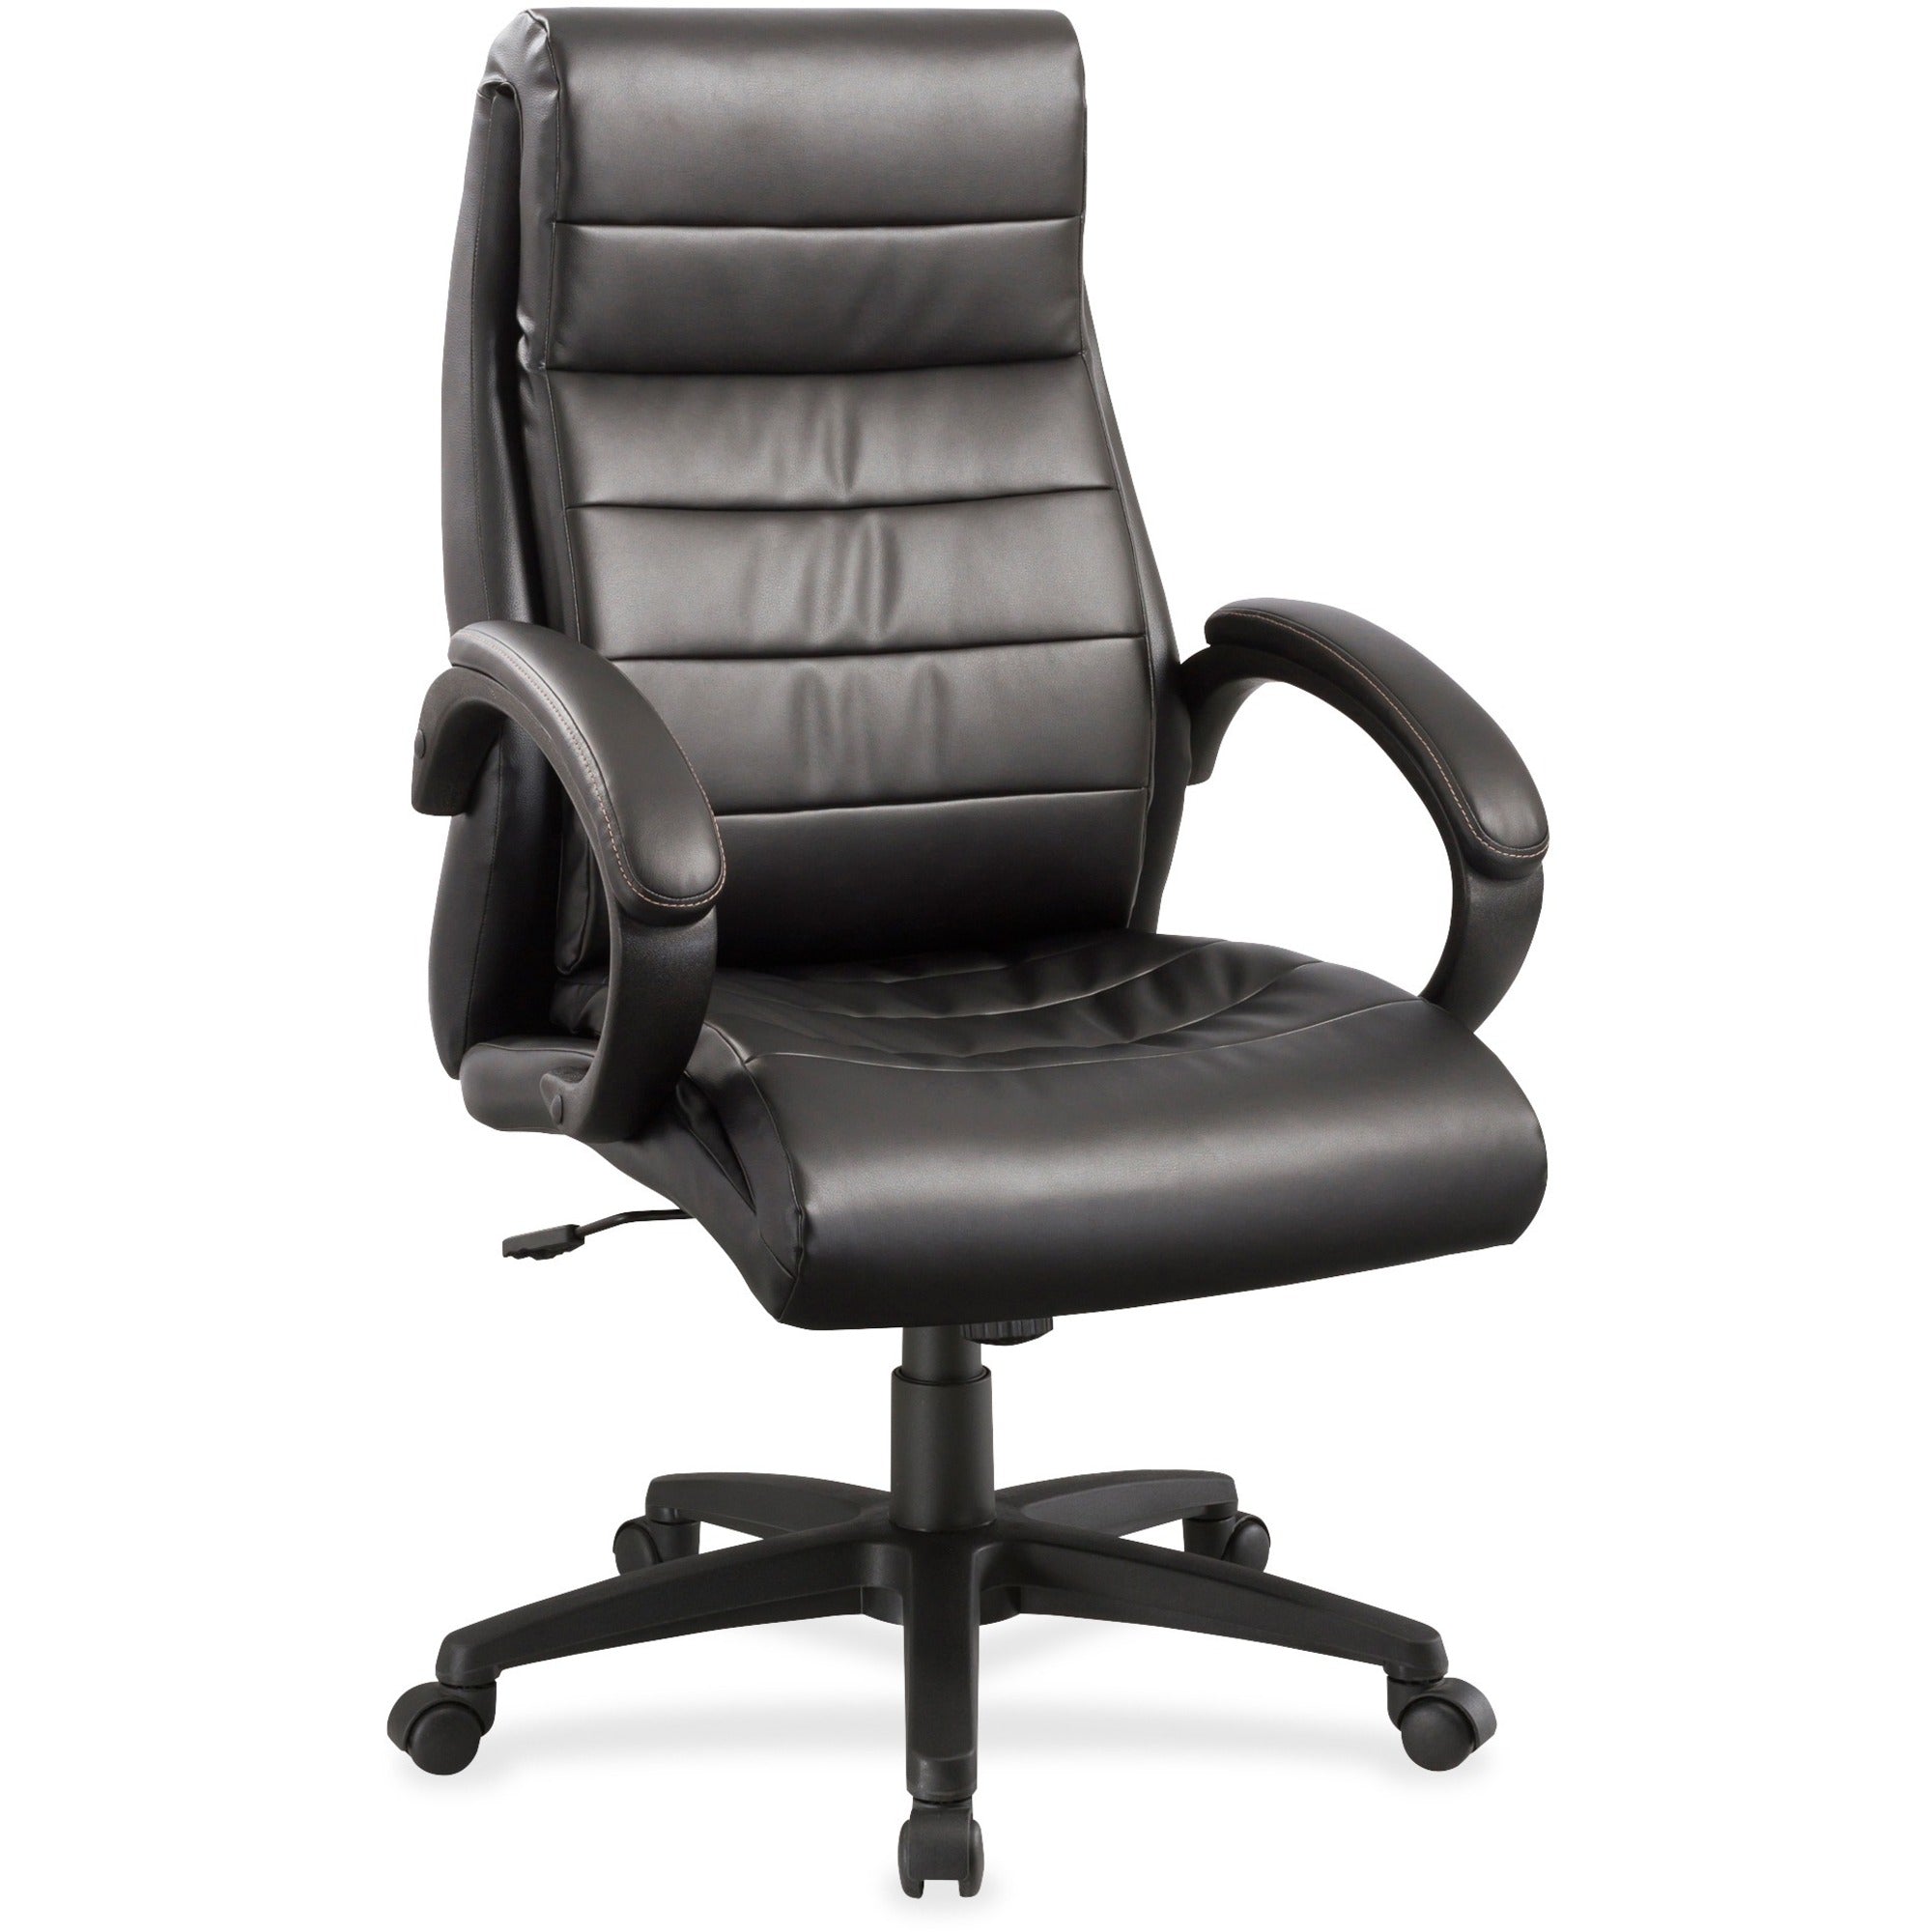 Lorell Deluxe High-back Office Chair - Leather Seat - Leather Back - High Back - 5-star Base - Black - 1 Each - 